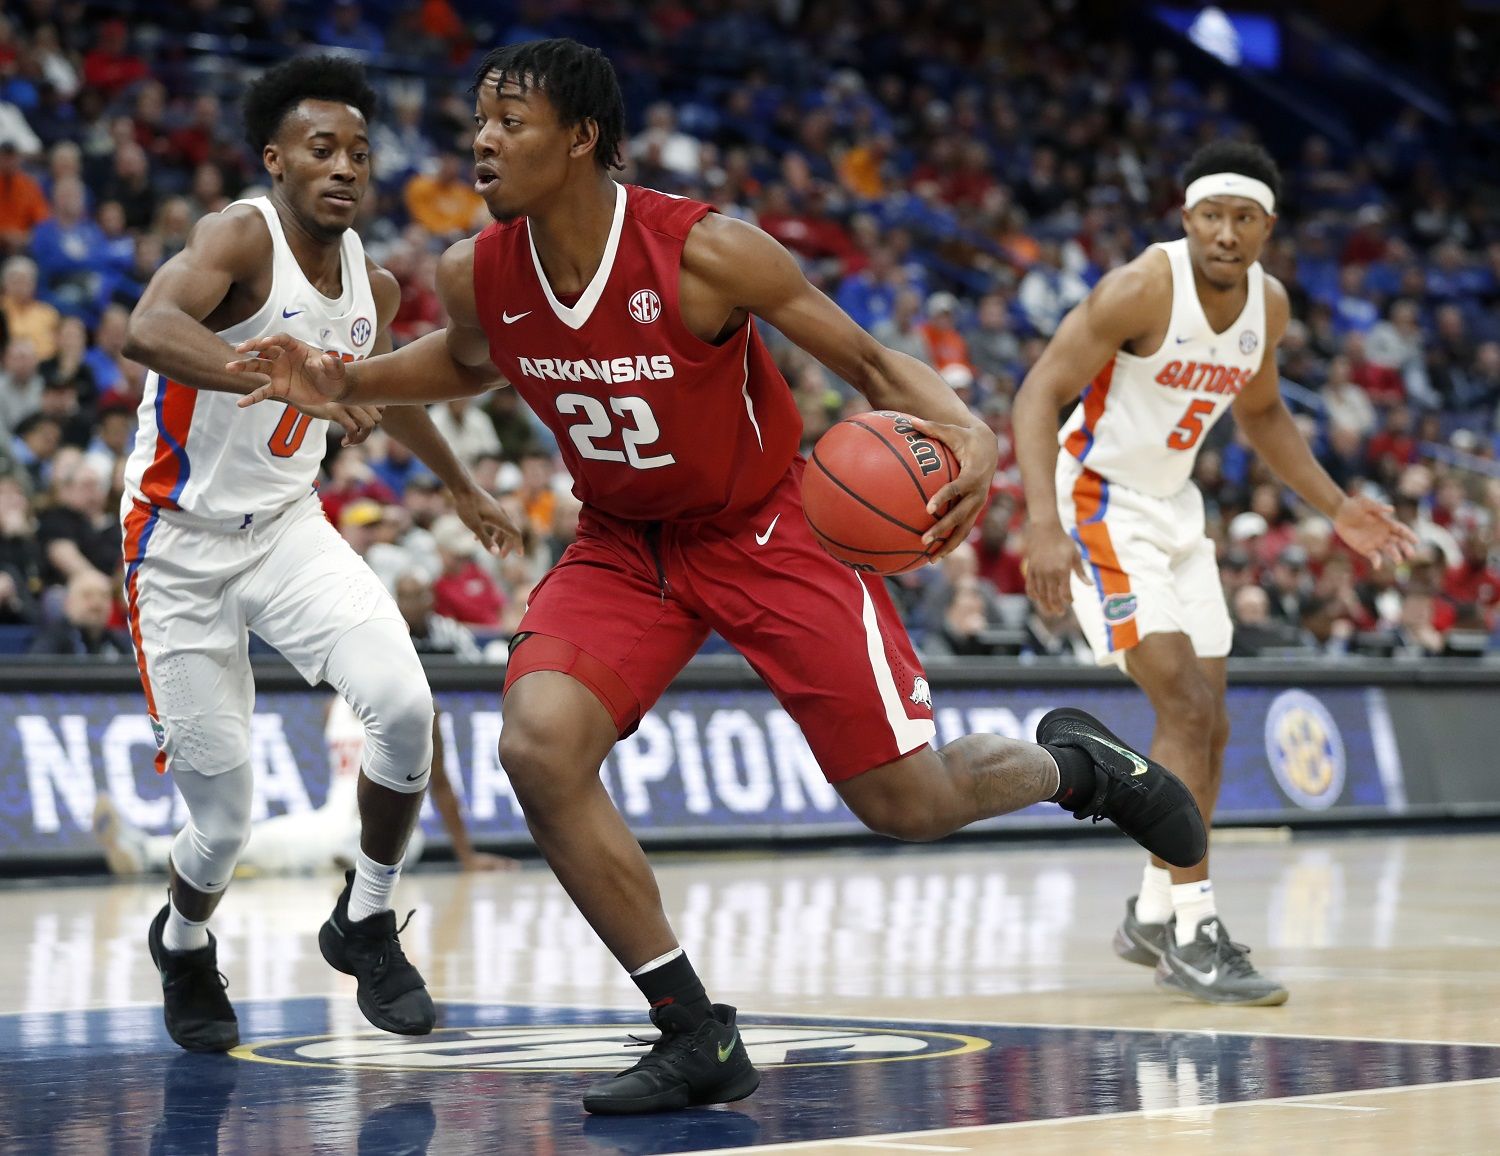 Arkansas' Gabe Osabuohien (22) heads to the basket as Florida's Mike Okauru, left, and KeVaughn Allen, right, defend during the first half of an NCAA college basketball game in the quarterfinals of the Southeastern Conference tournament Friday, March 9, 2018, in St. Louis. (AP Photo/Jeff Roberson)